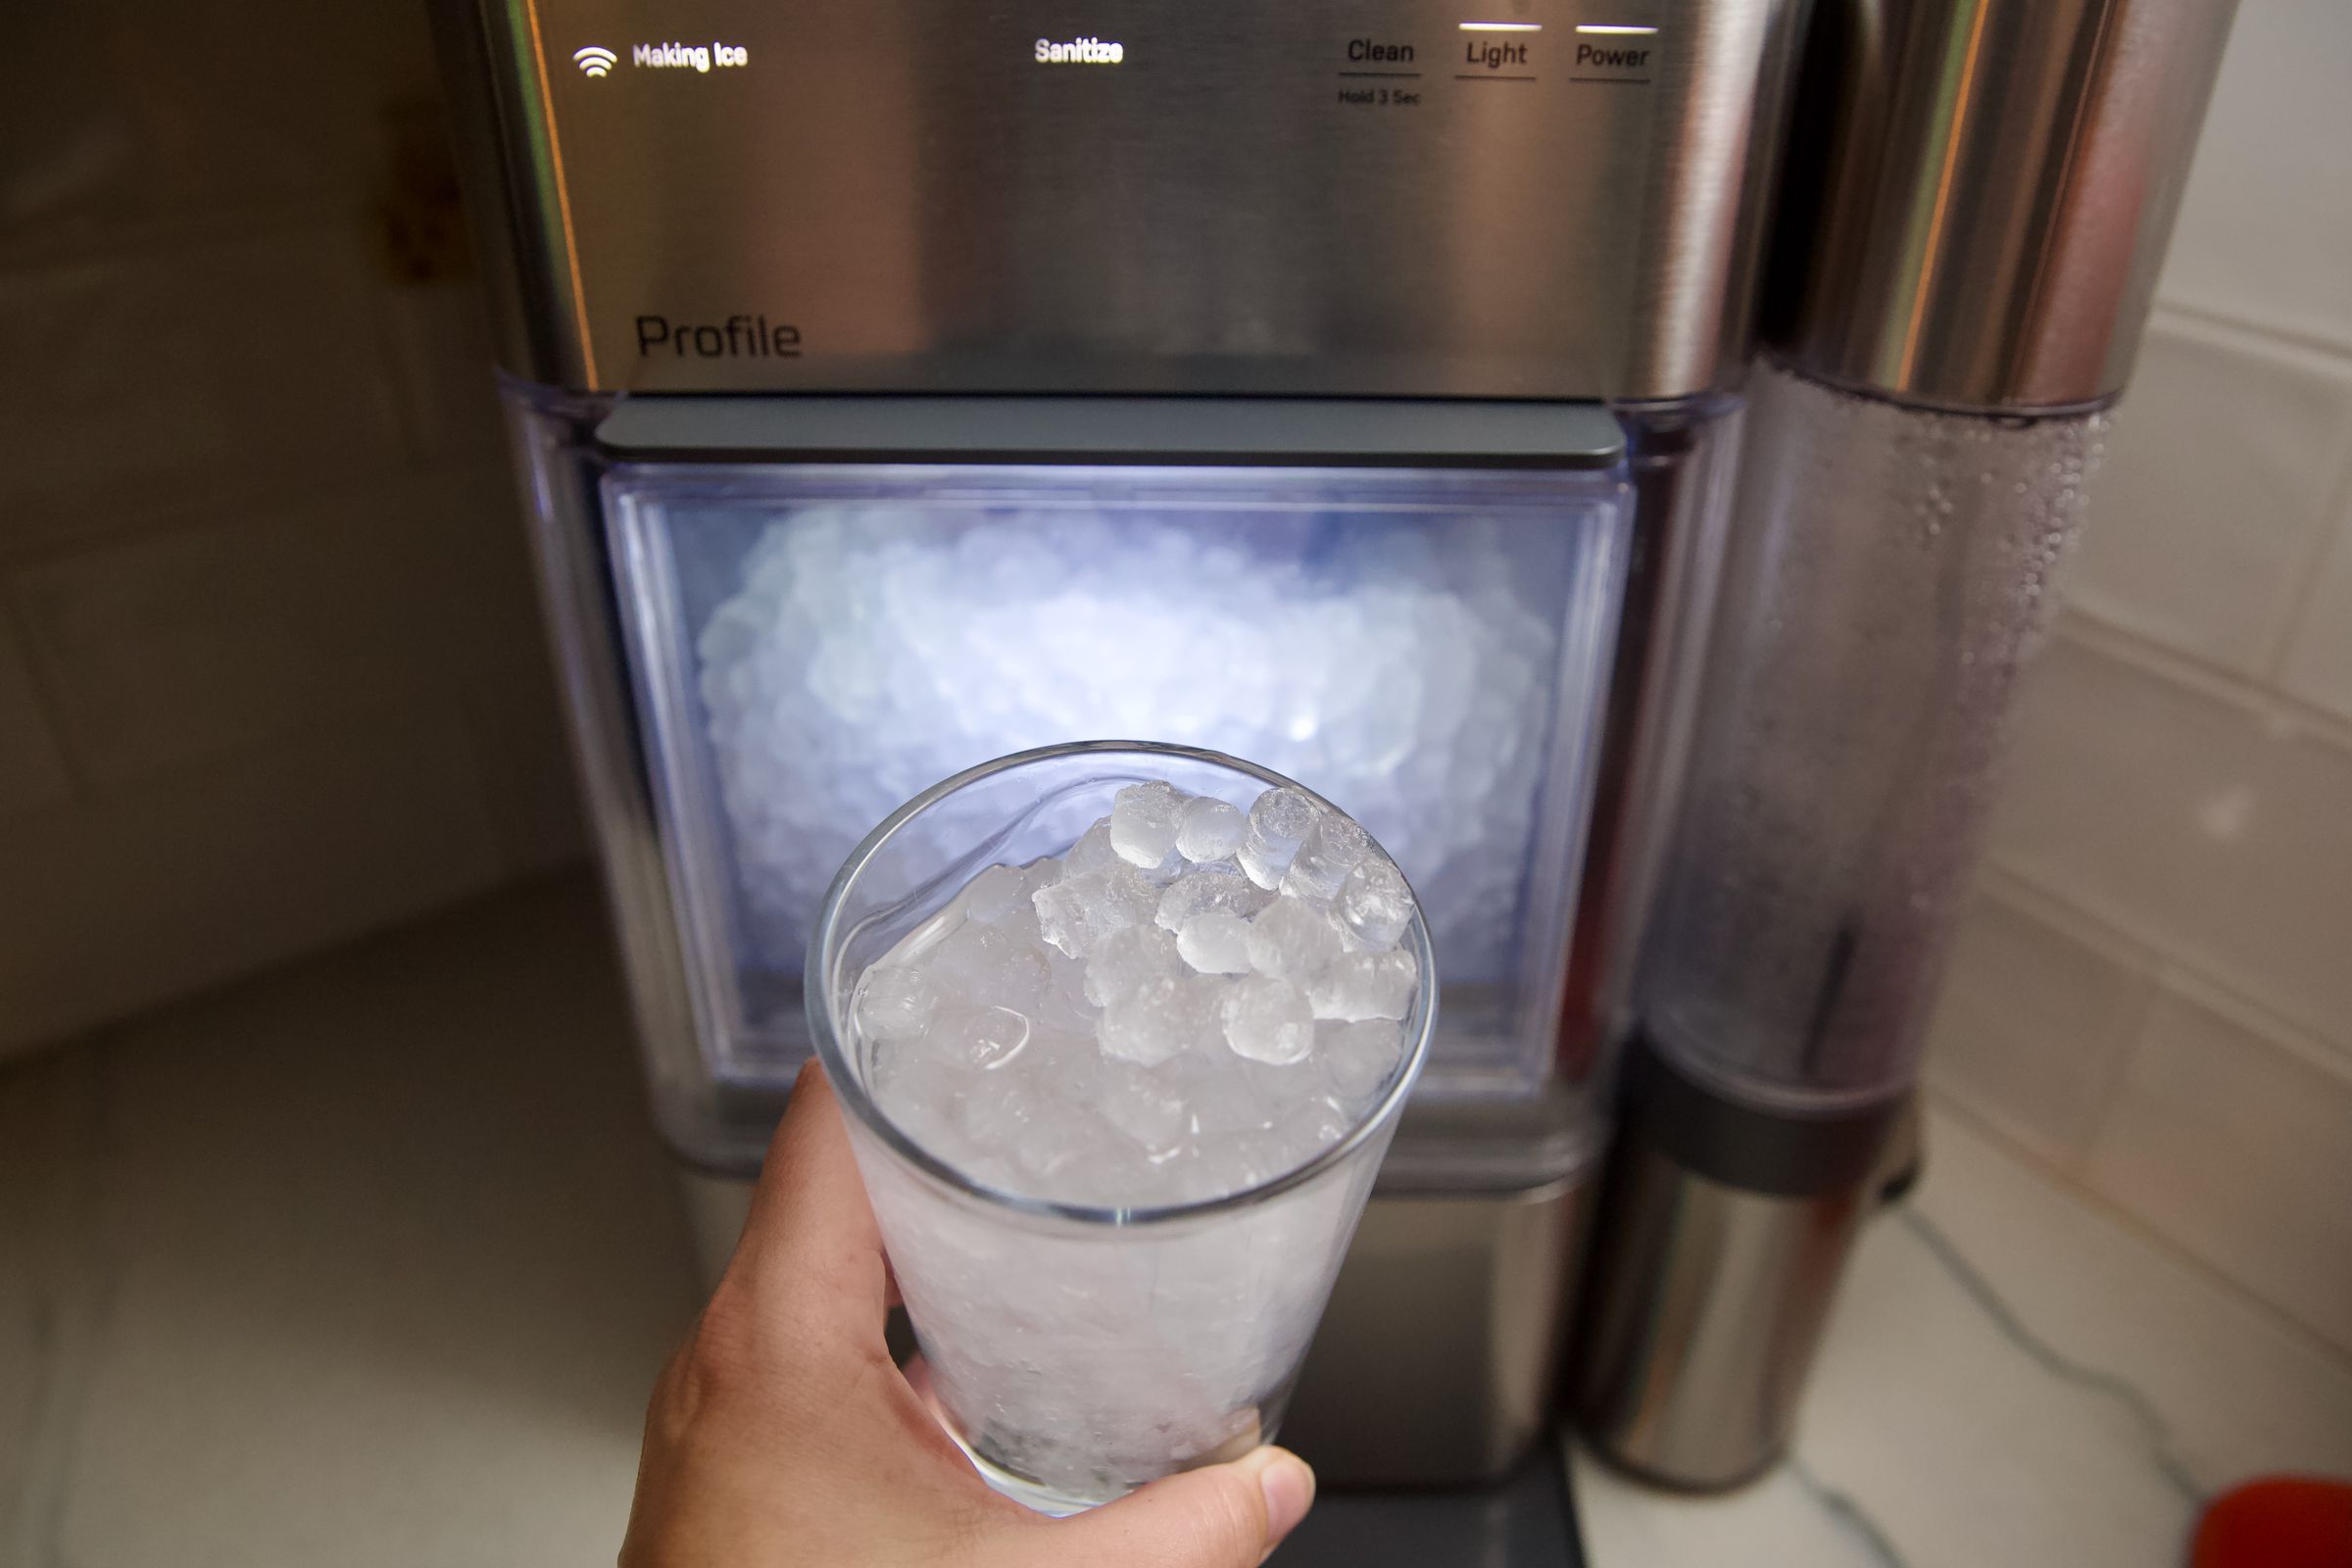 The Opal 2.0 Ultra Nugget Ice Maker is an update to the Opal 2.0. It has a new water filter, air filter, and cleaning system that should make for easier maintenance.